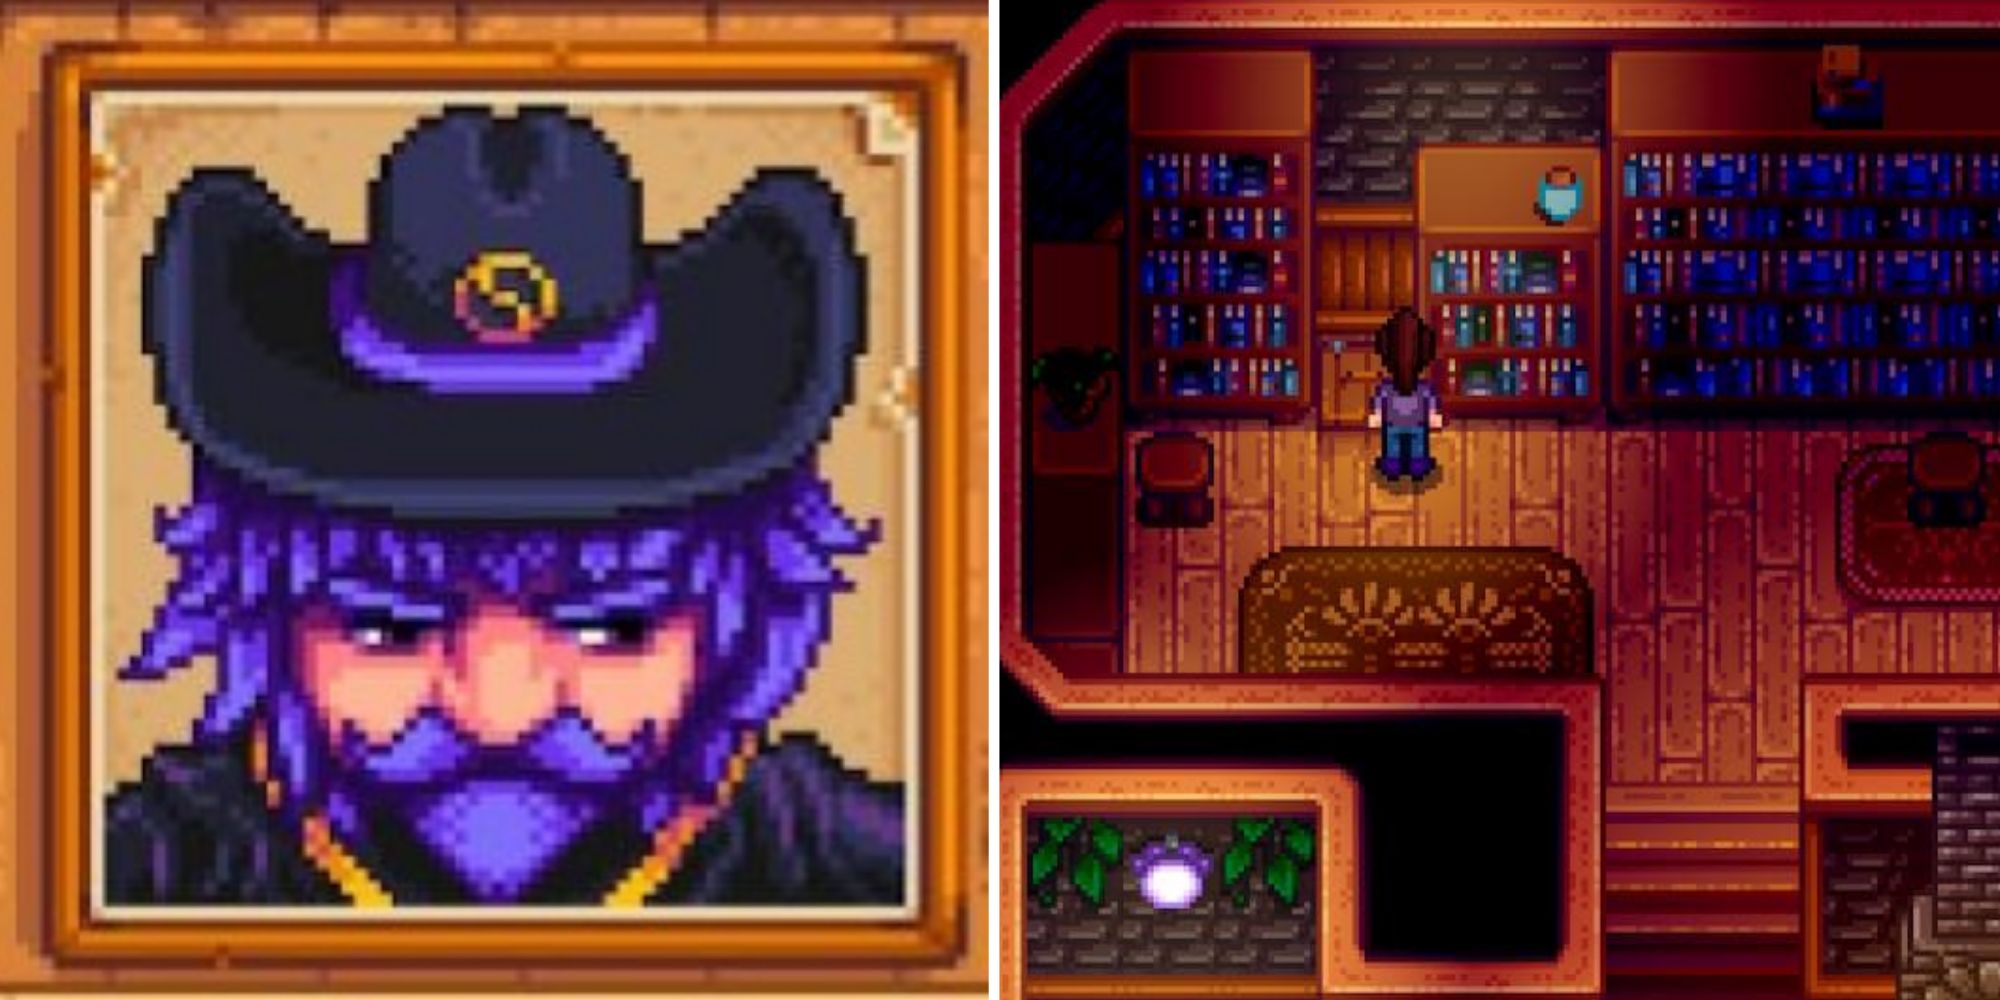 How To Change Your Appearance And Looks In Stardew Valley